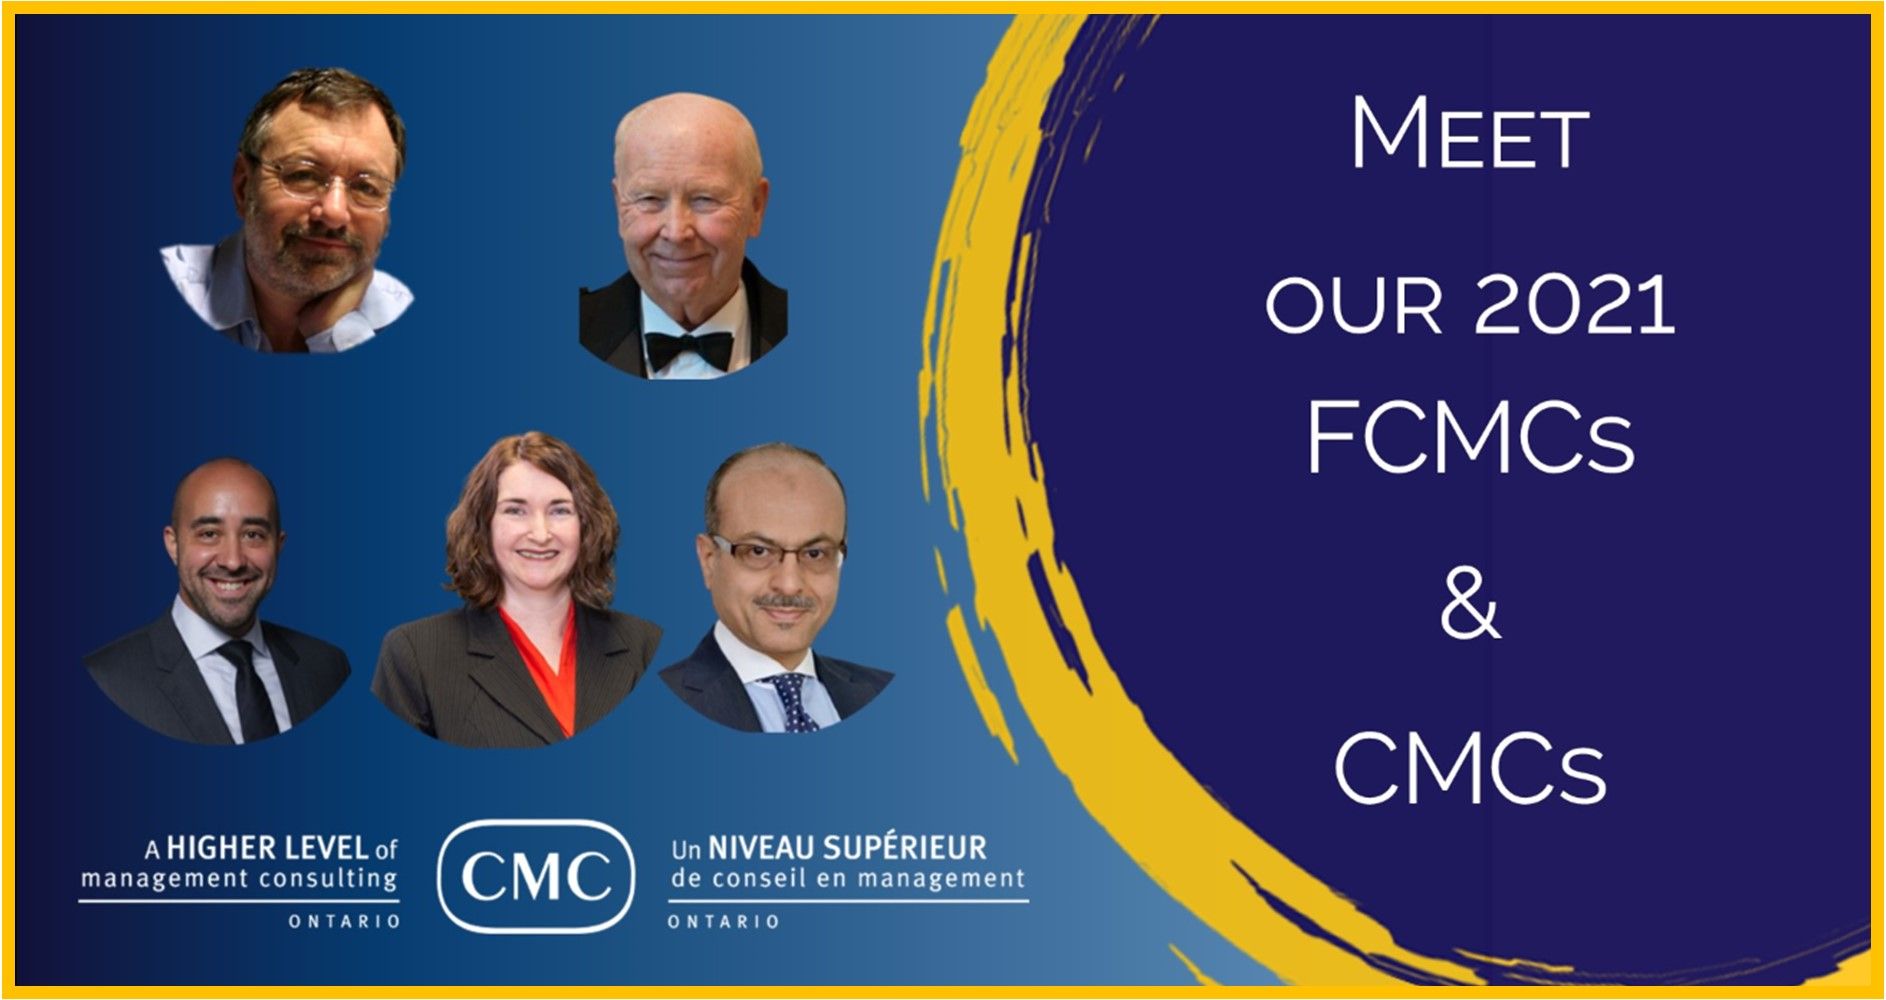 Meet our 2021 FCMCs and CMCs